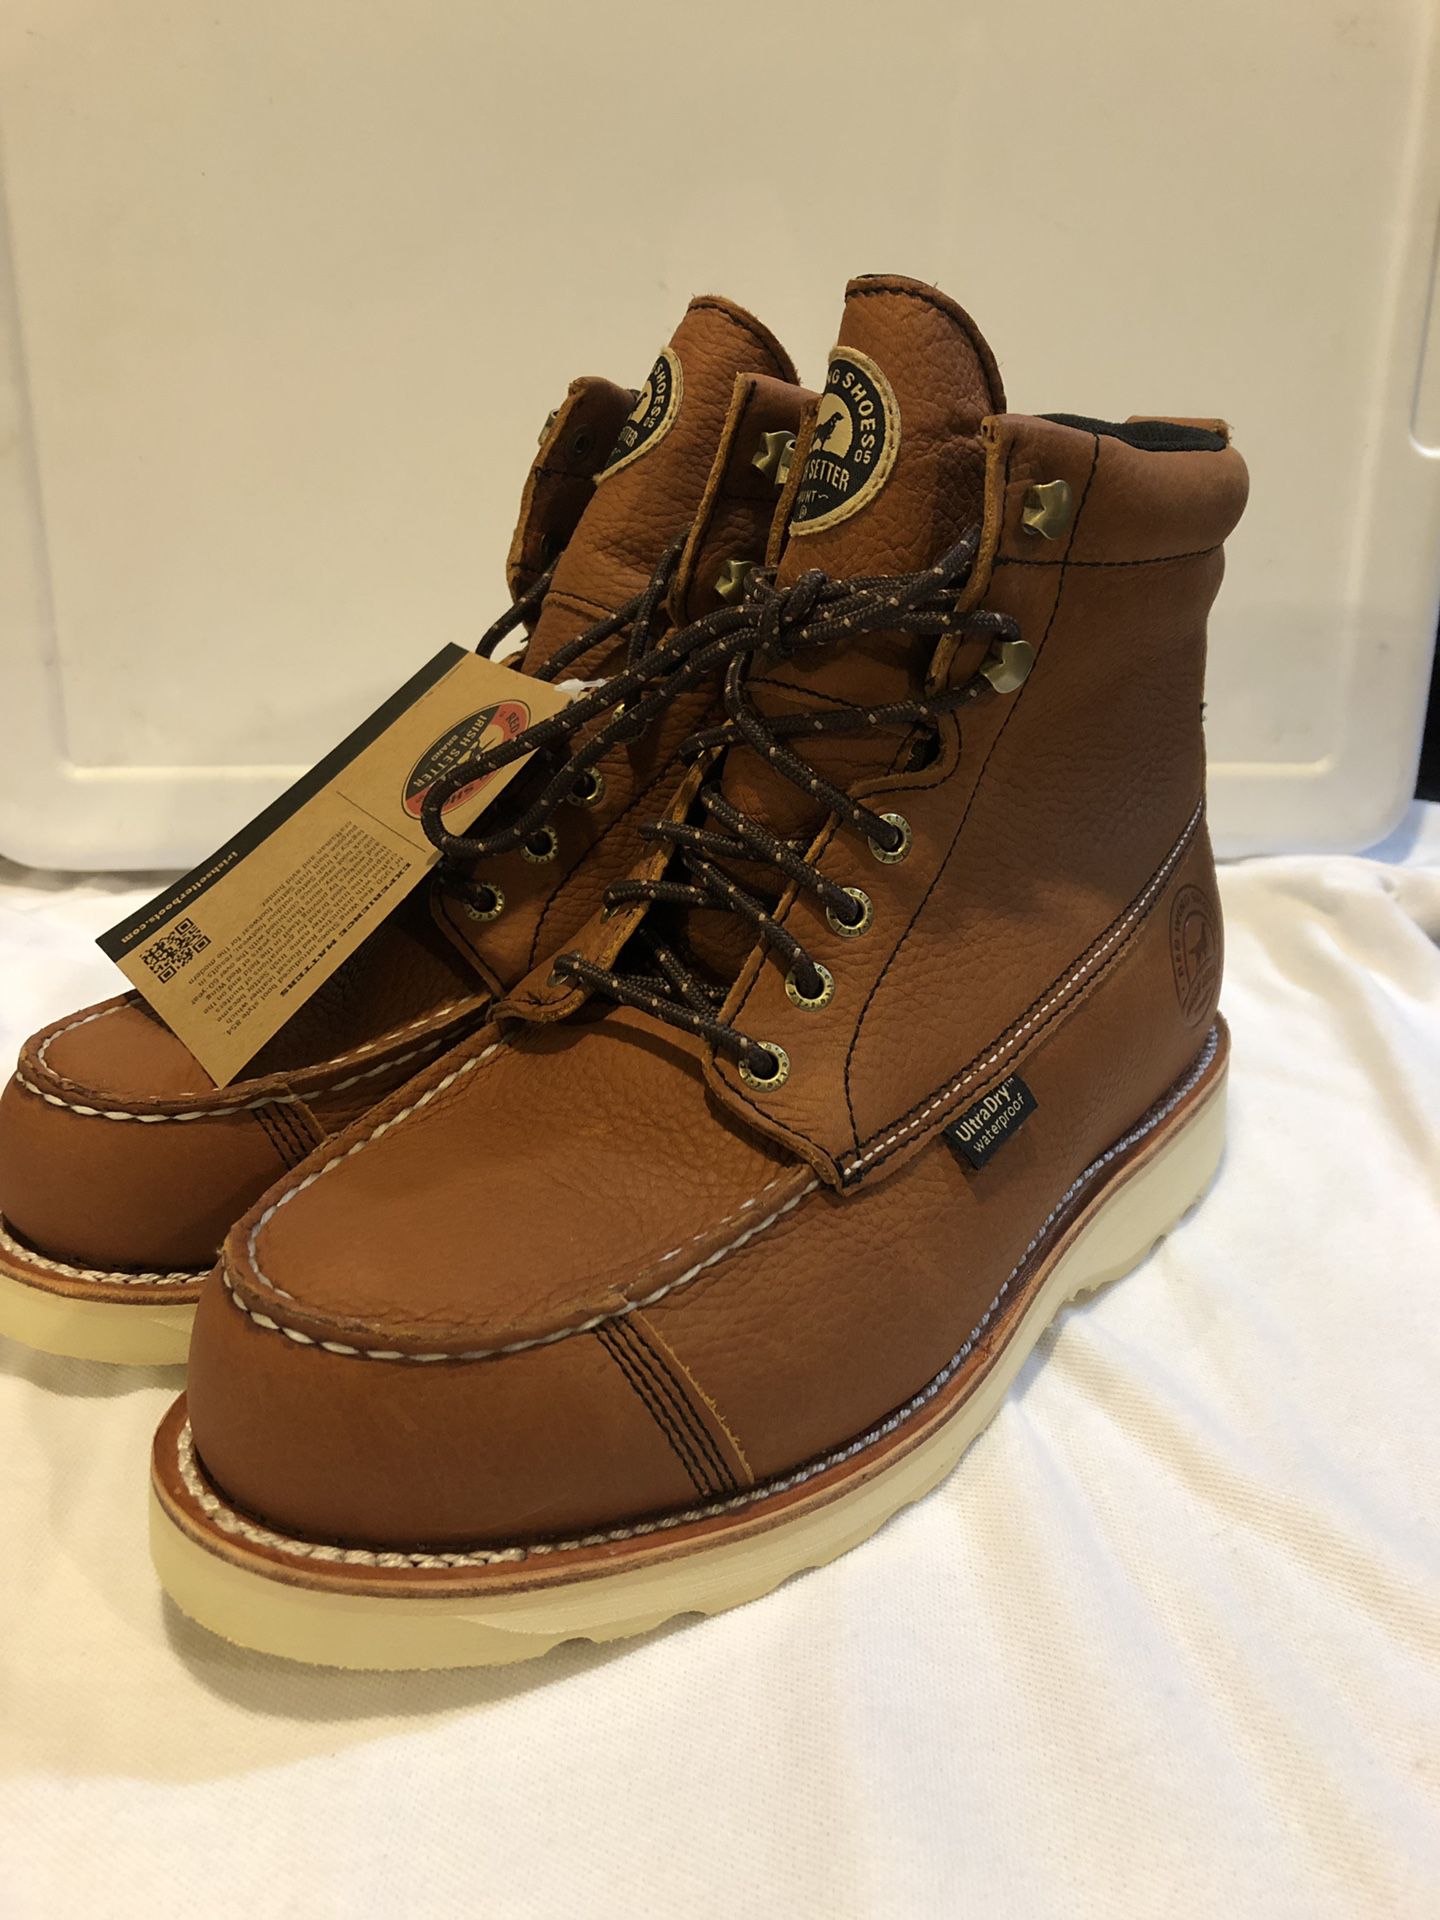 Red Wing Wingshooter - men’s size 9